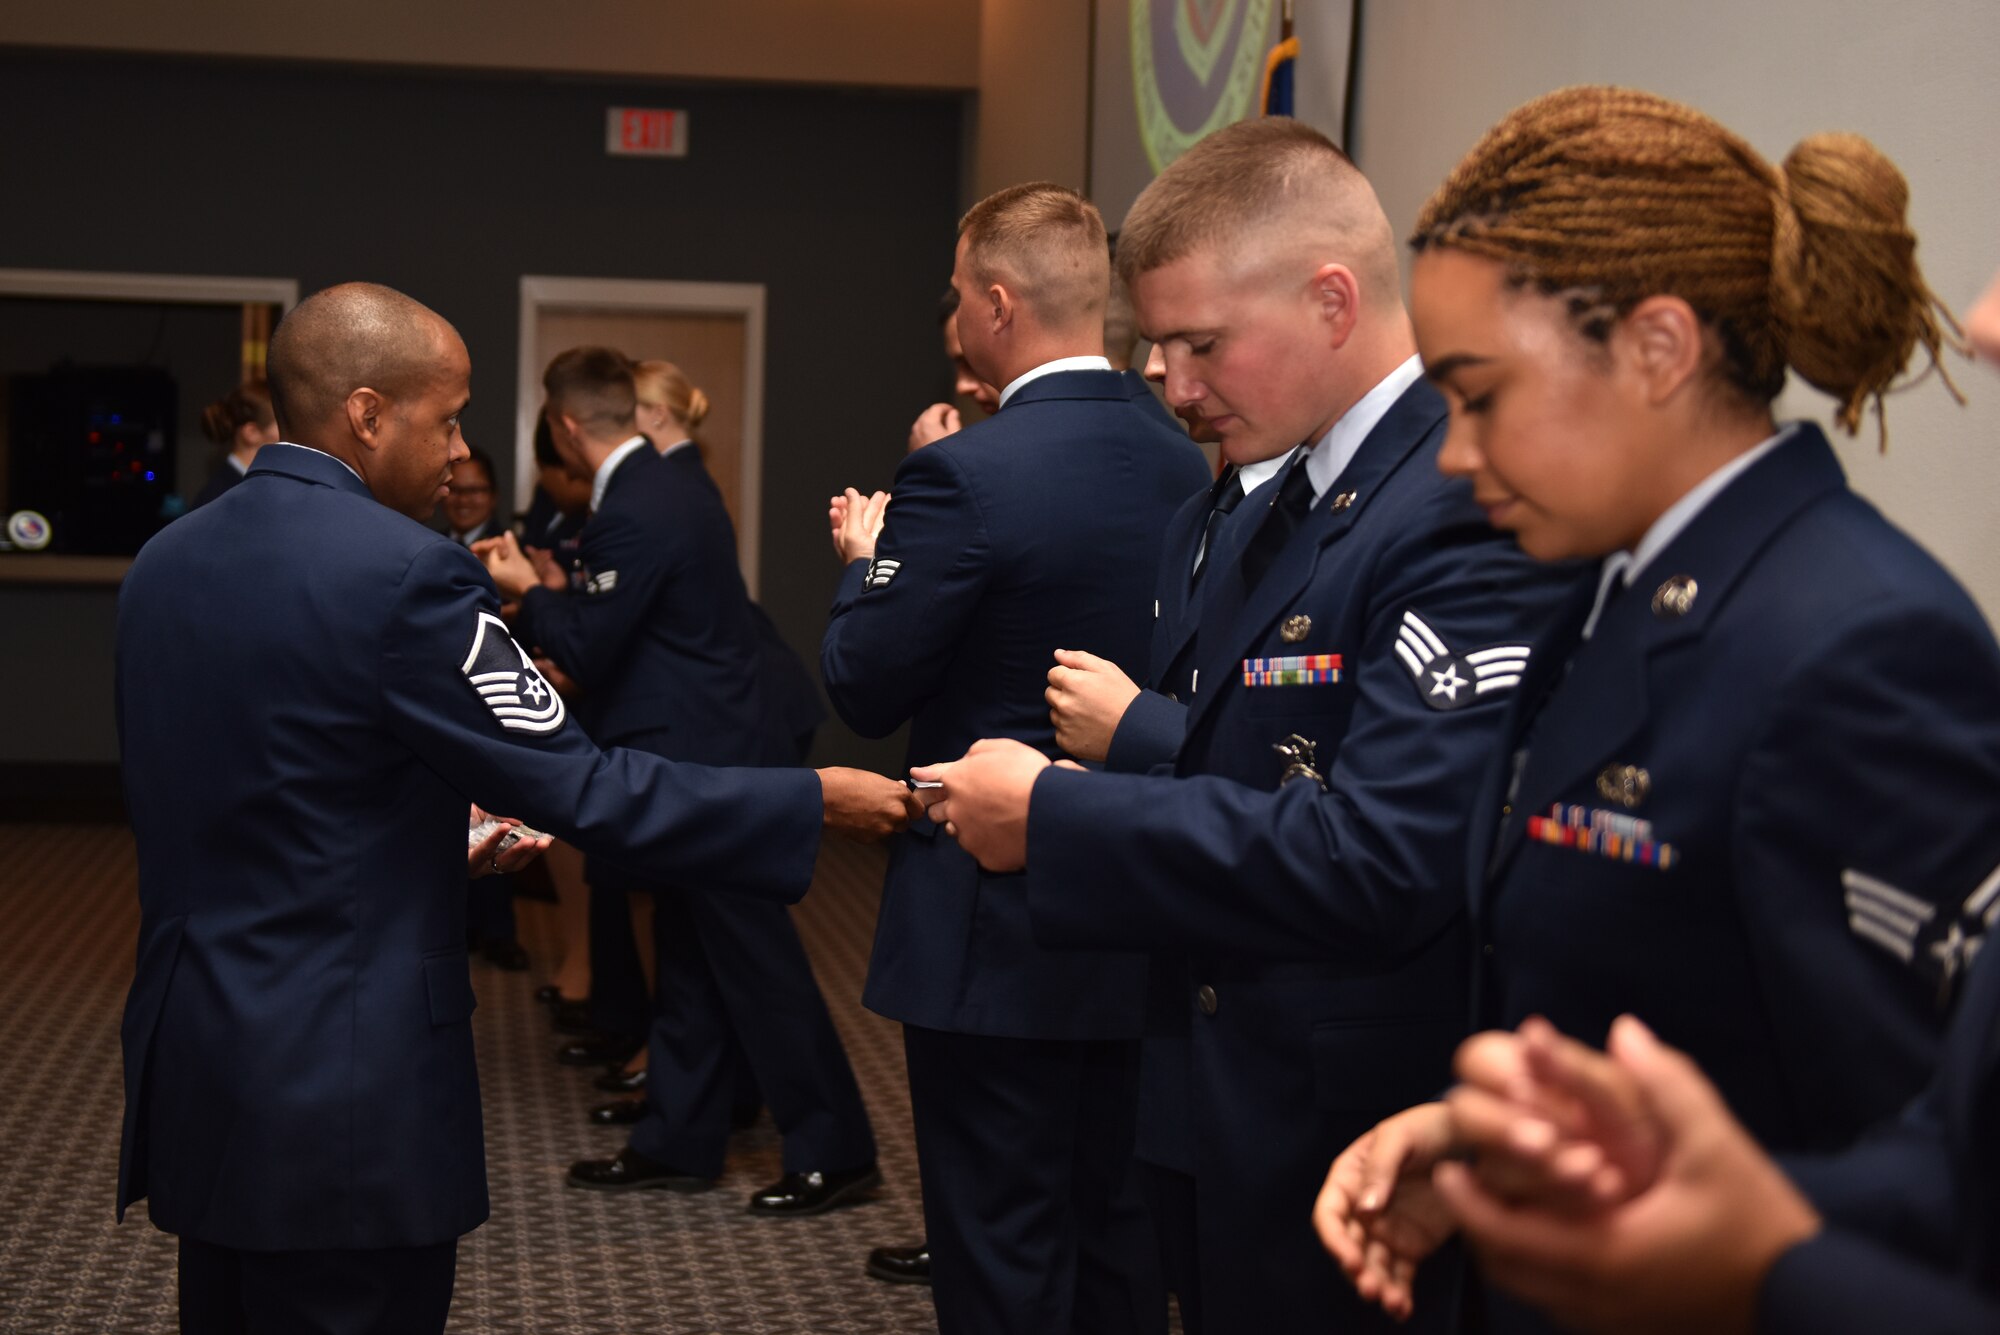 U.S. Air Force Master Sgt. Sheraz Cedeno, 17th Training Wing Airman Leadership School commandant, coins and congratulates graduates of class 19-E after their graduation held at the event center on Goodfellow Air Force Base, Texas, July 11, 2019. Graduates from the leadership course will go on to become first-line supervisors at their workplaces, putting into practice the skills they learned in class. (U.S. Air Force photo by Senior Airman Seraiah Wolf/Released)